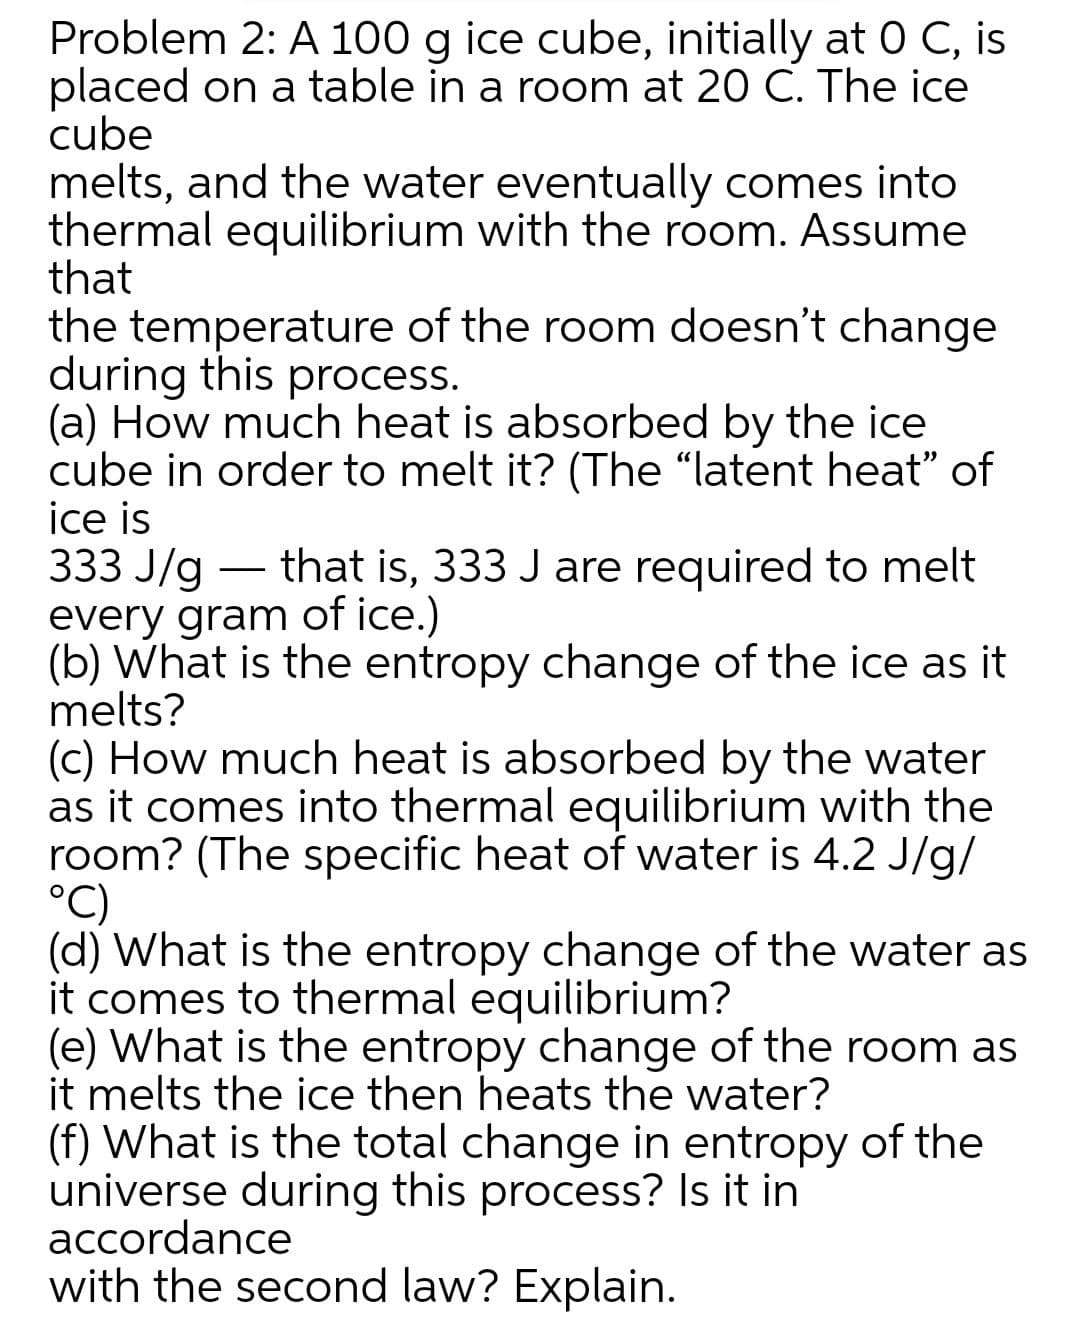 Problem 2: A 100 g ice cube, initially at 0 C, is
placed on a table in a room at 20 C. The ice
cube
melts, and the water eventually comes into
thermal equilibrium with the room. Assume
that
the temperature of the room doesn't change
during this process.
(a) How much heat is absorbed by the ice
cube in order to melt it? (The "latent heat" of
ice is
333 J/g
every gram of ice.)
(b) What is the entropy change of the ice as it
melts?
(c) How much heat is absorbed by the water
as it comes into thermal equilibrium with the
room? (The specific heat of water is 4.2 J/g/
°C)
(d) What is the entropy change of the water as
it comes to thermal equilibrium?
(e) What is the entropy change of the room as
it melts the ice then heats the water?
(f) What is the total change in entropy of the
universe during this process? Is it in
accordance
with the second law? Explain.
that is, 333 J are required to melt
-
